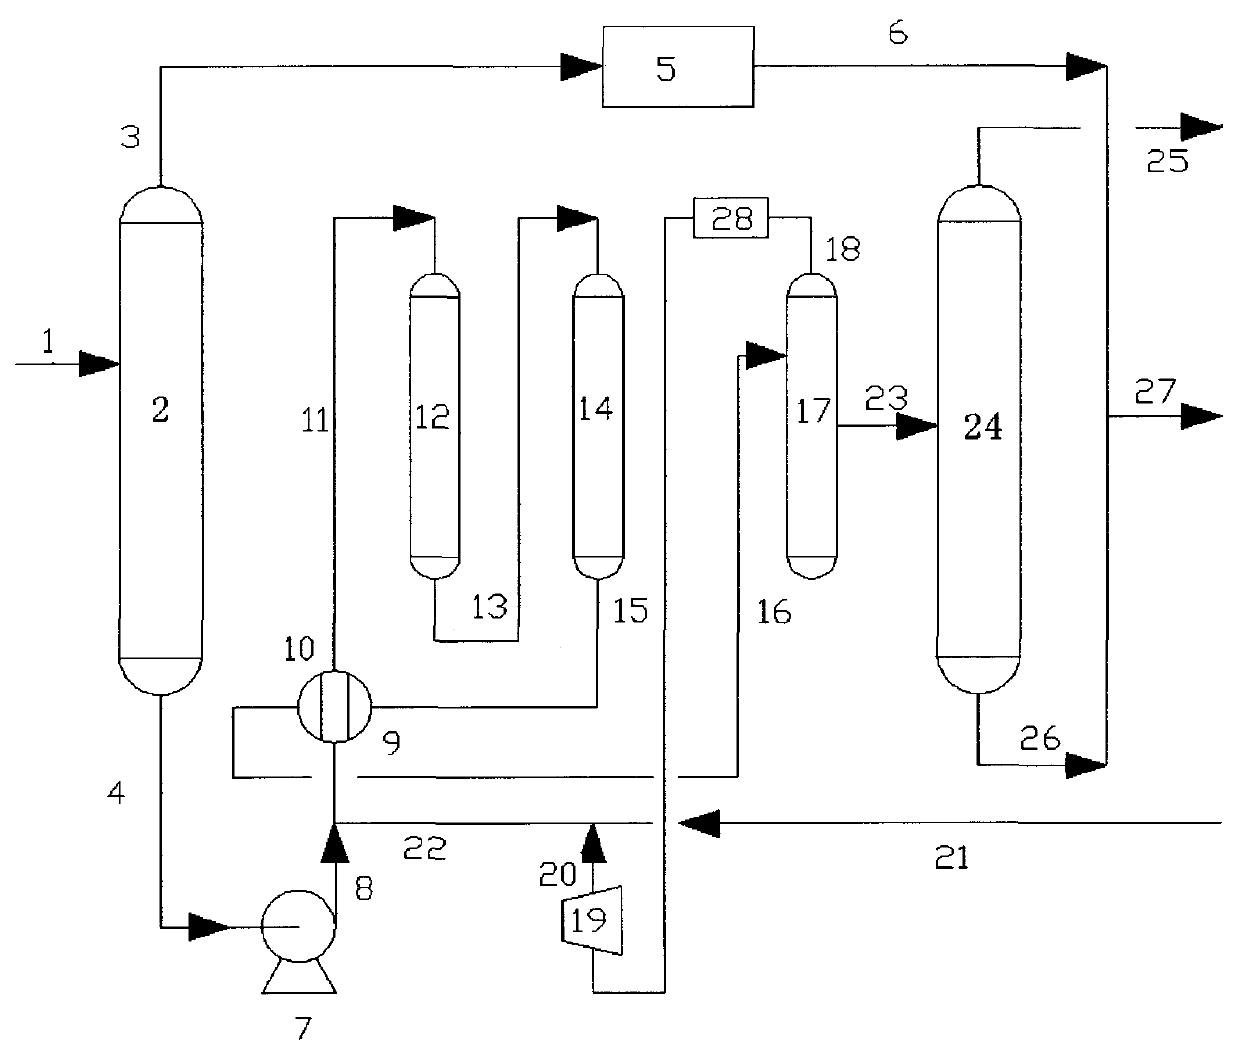 Process method for reducing olefins by hydrogen desulfurization of catalytic gasoline